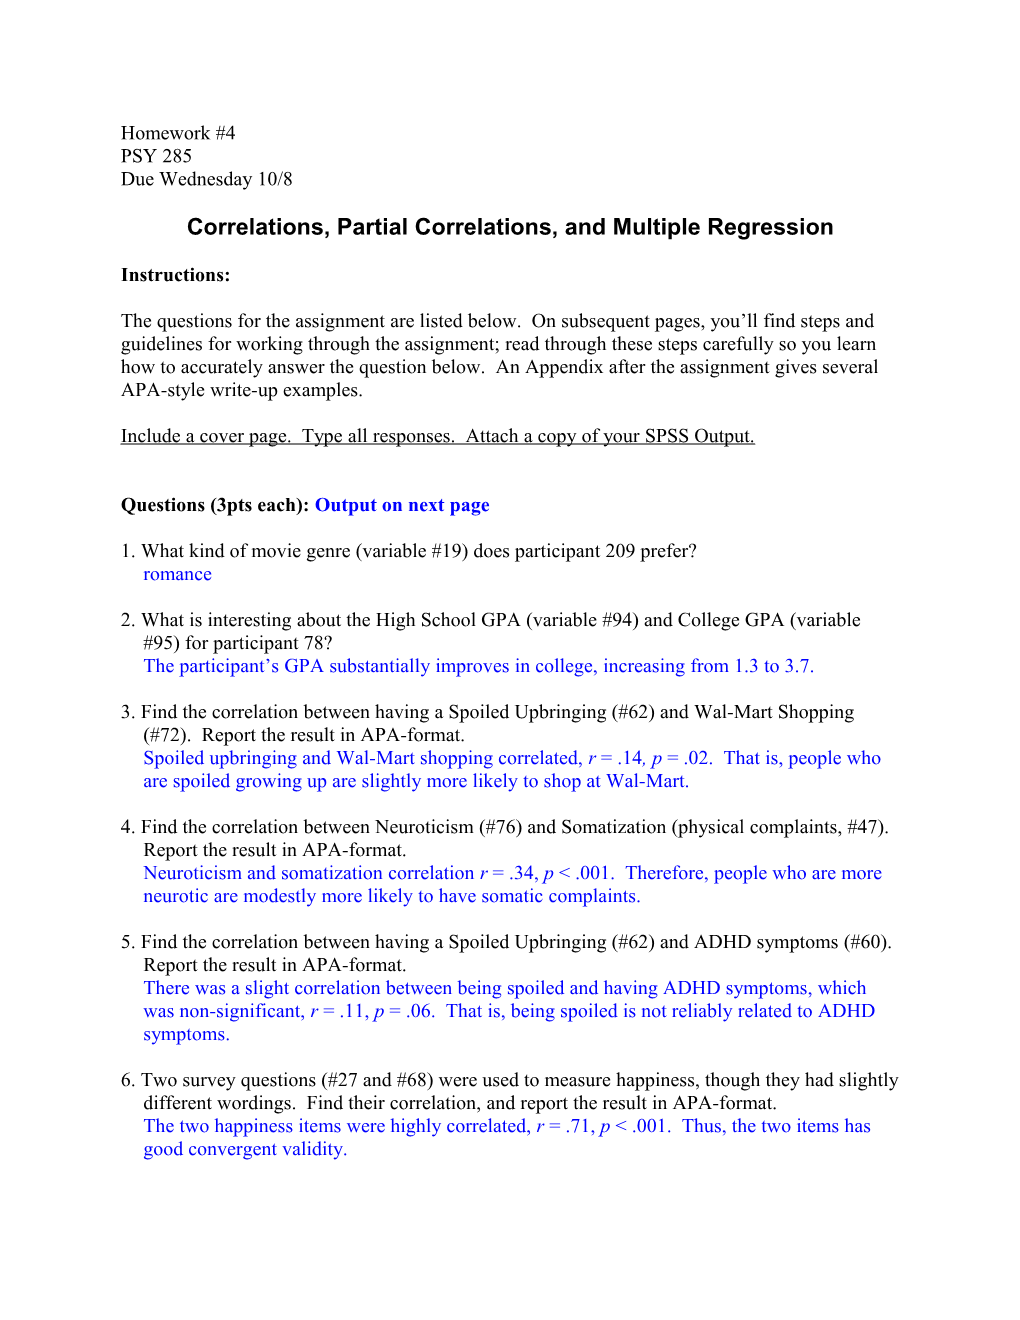 Correlations, Partial Correlations, and Multiple Regression